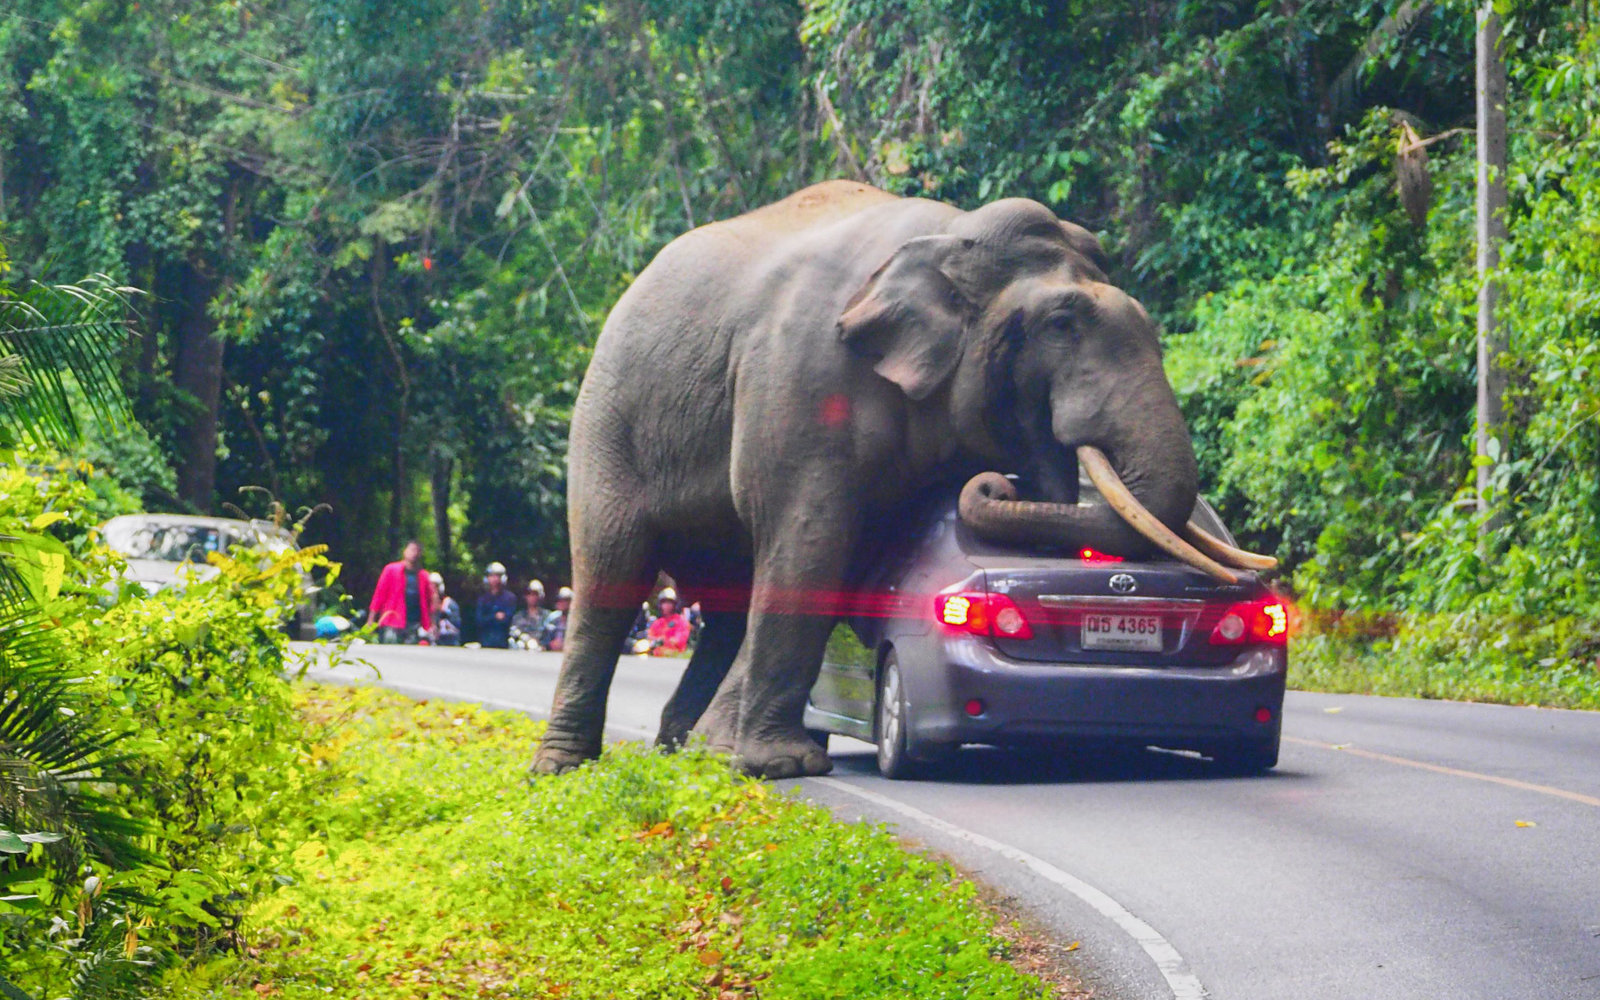 TOPSHOT - In this photo taken on October 29, 2019, a wild elephant stops a car on a road at Khao Yai National Park in Thailand's Nakhon Ratchasima province. - The driver escaped unhurt with his car slightly damaged. (Photo by Pratya CHUTIPASKUL / AFP) (Photo by PRATYA CHUTIPASKUL/AFP via Getty Images)